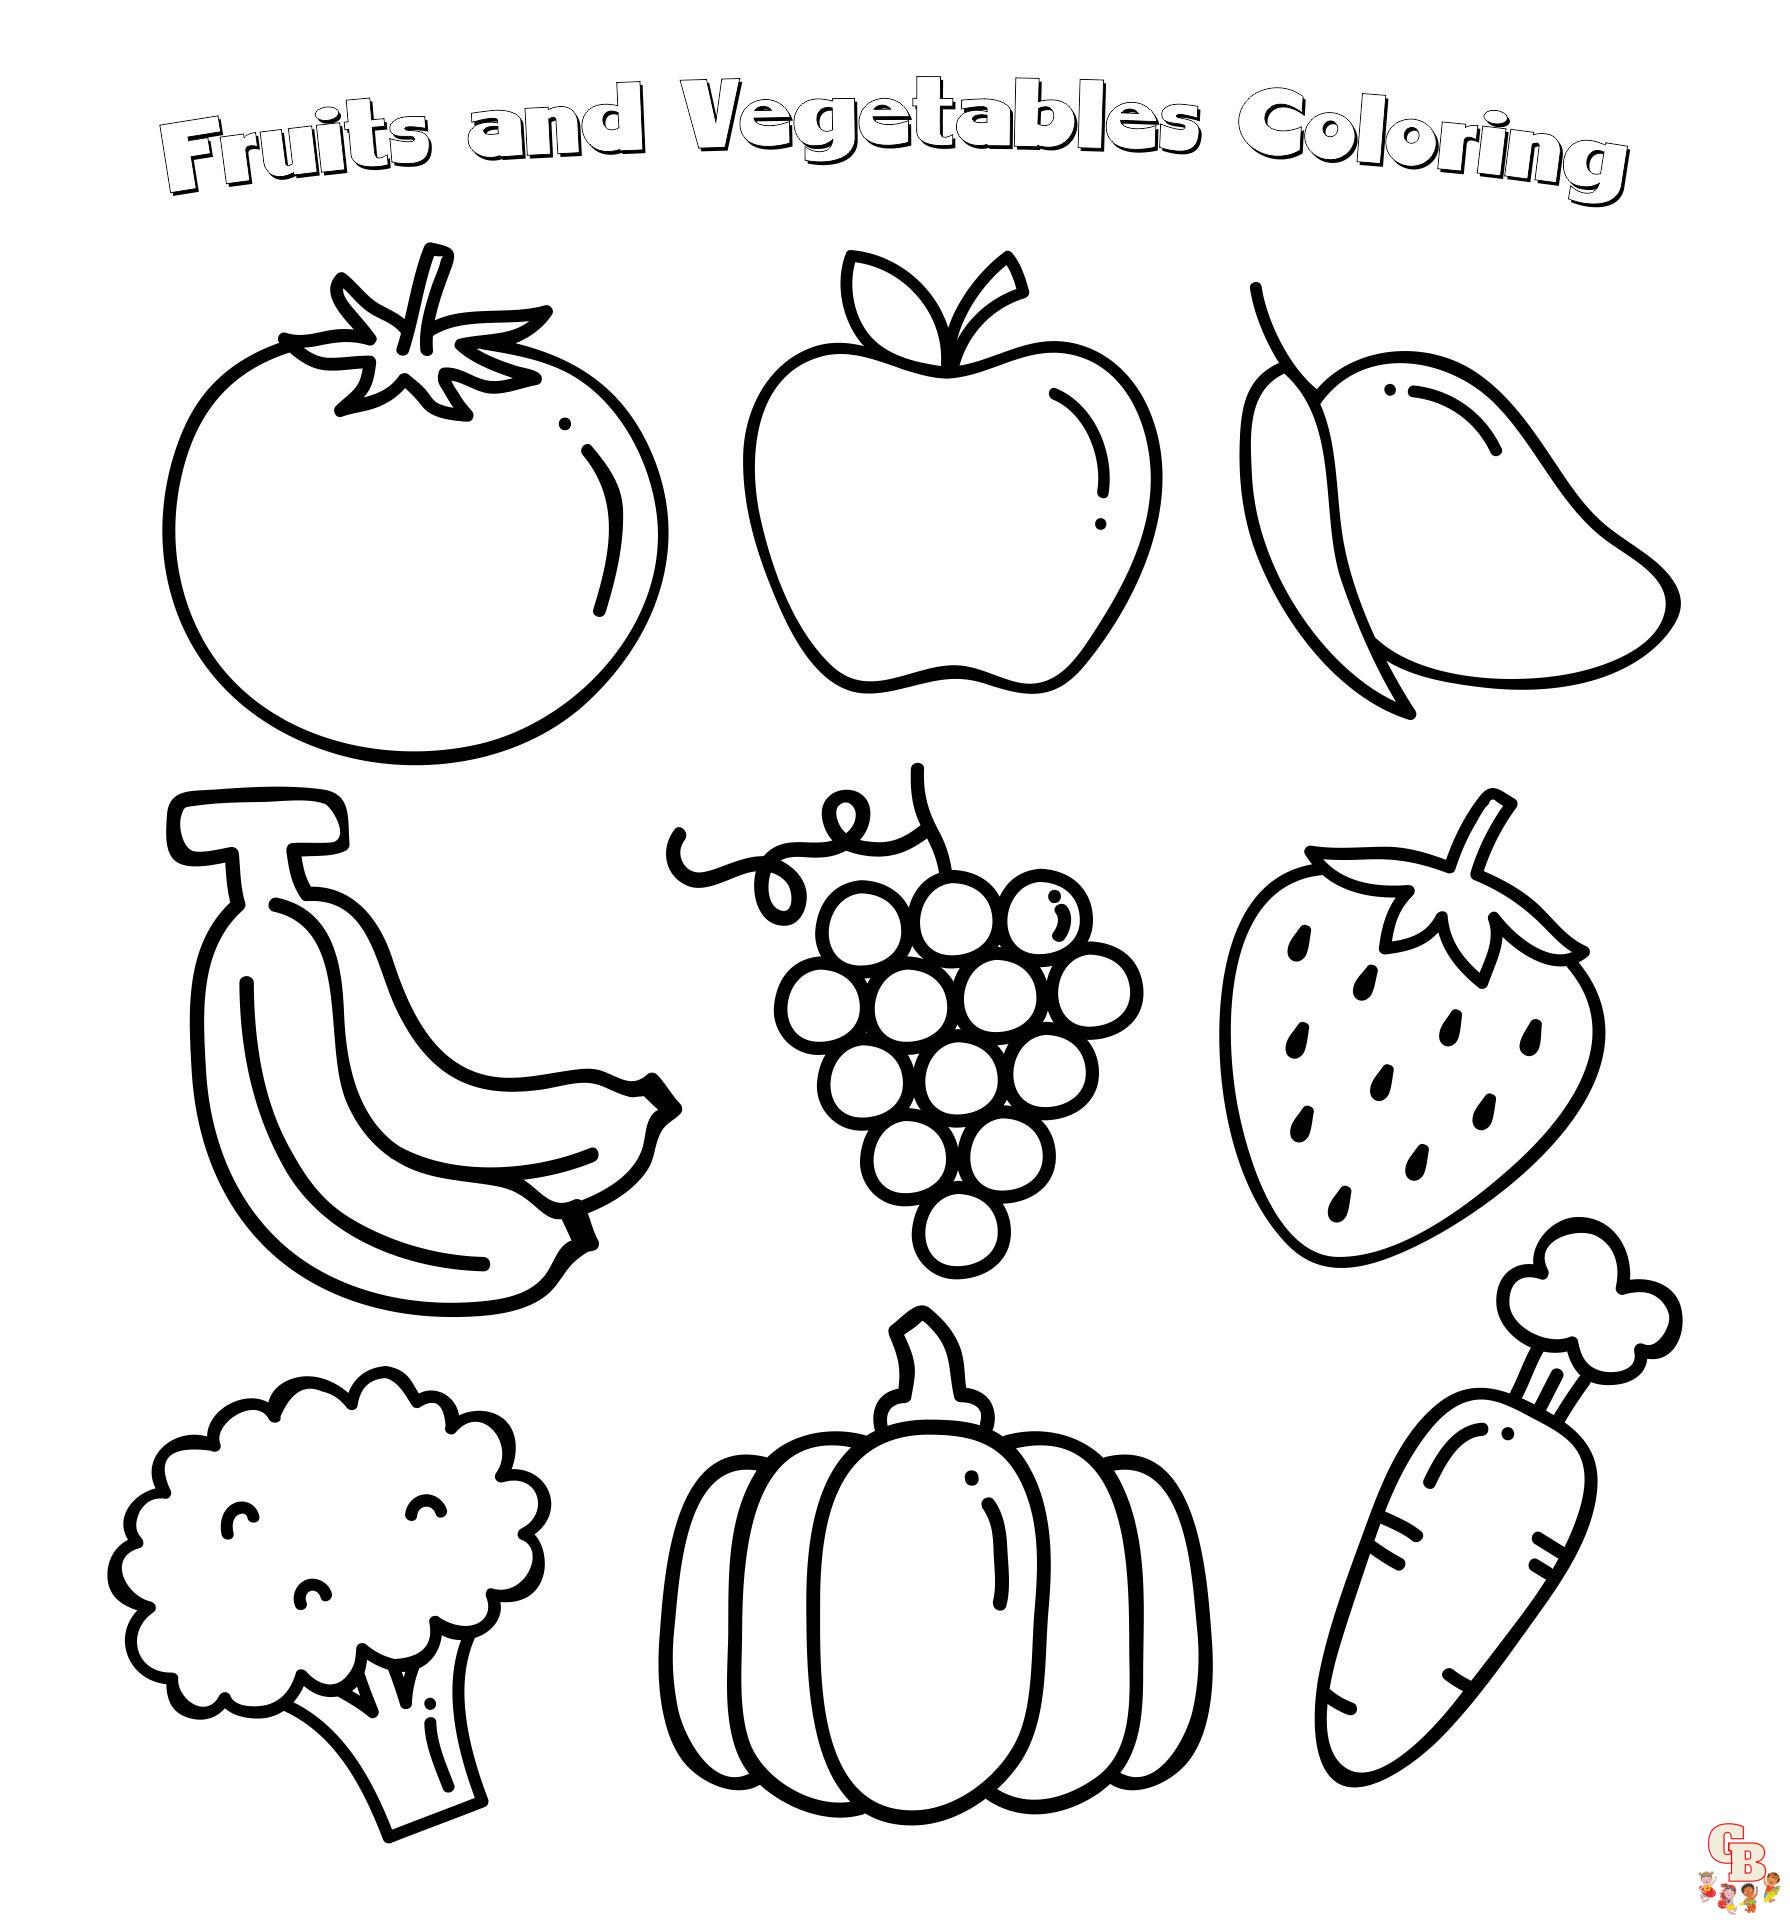 fruits-and-vegetables-coloring-page